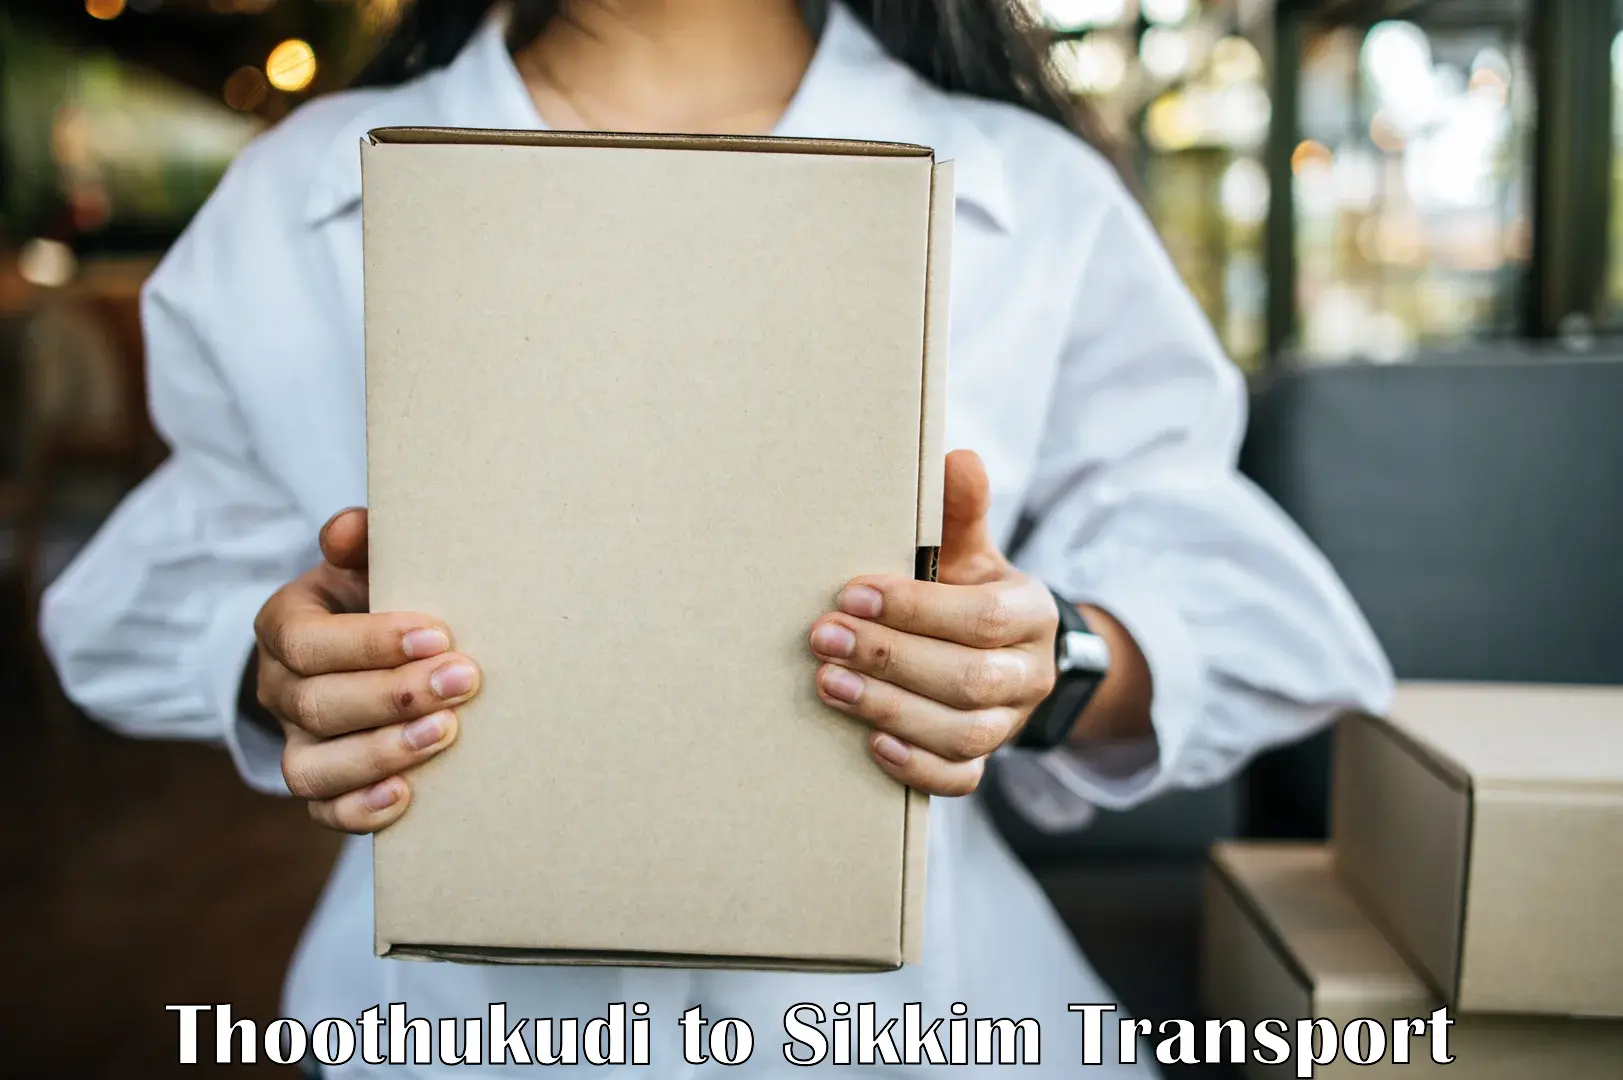 Delivery service Thoothukudi to Sikkim